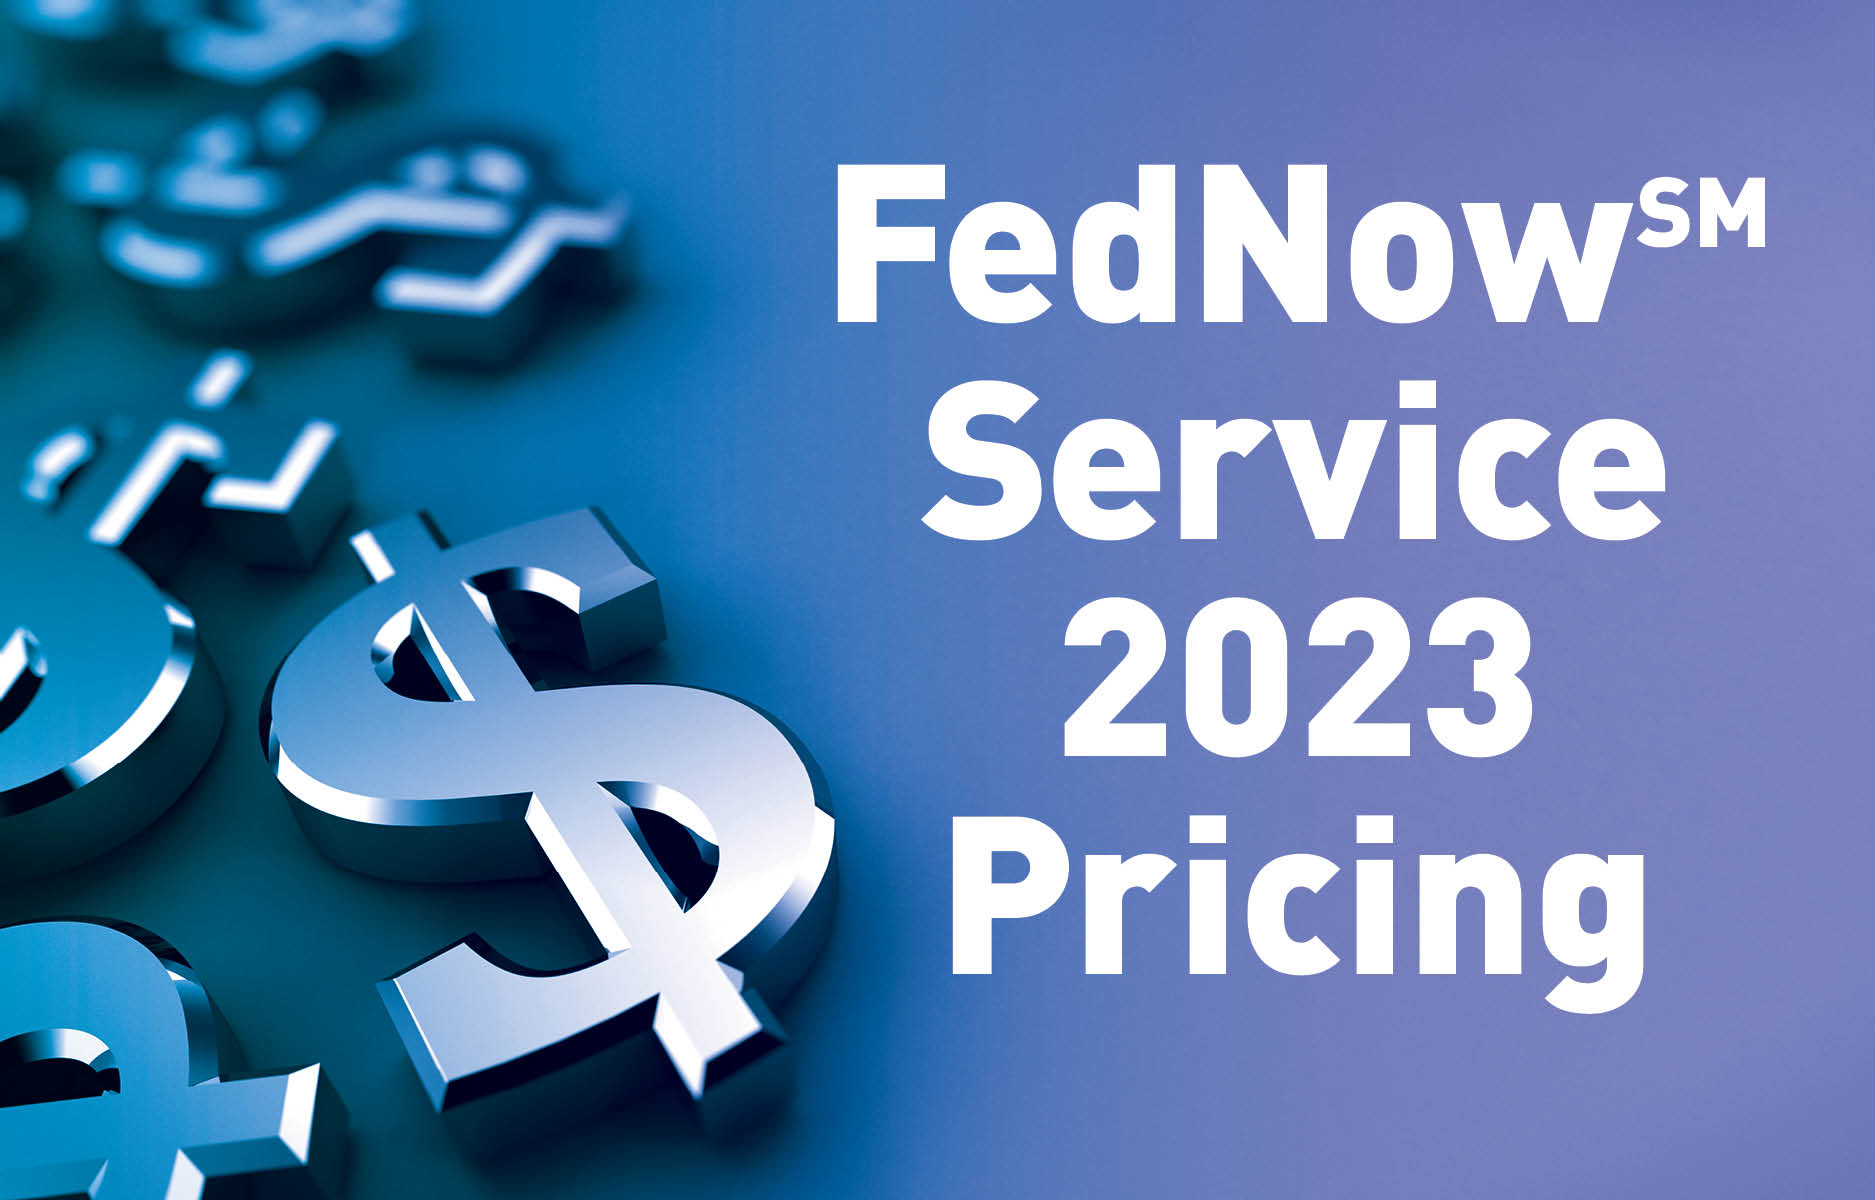 FedNow Service Pricing is Now Available